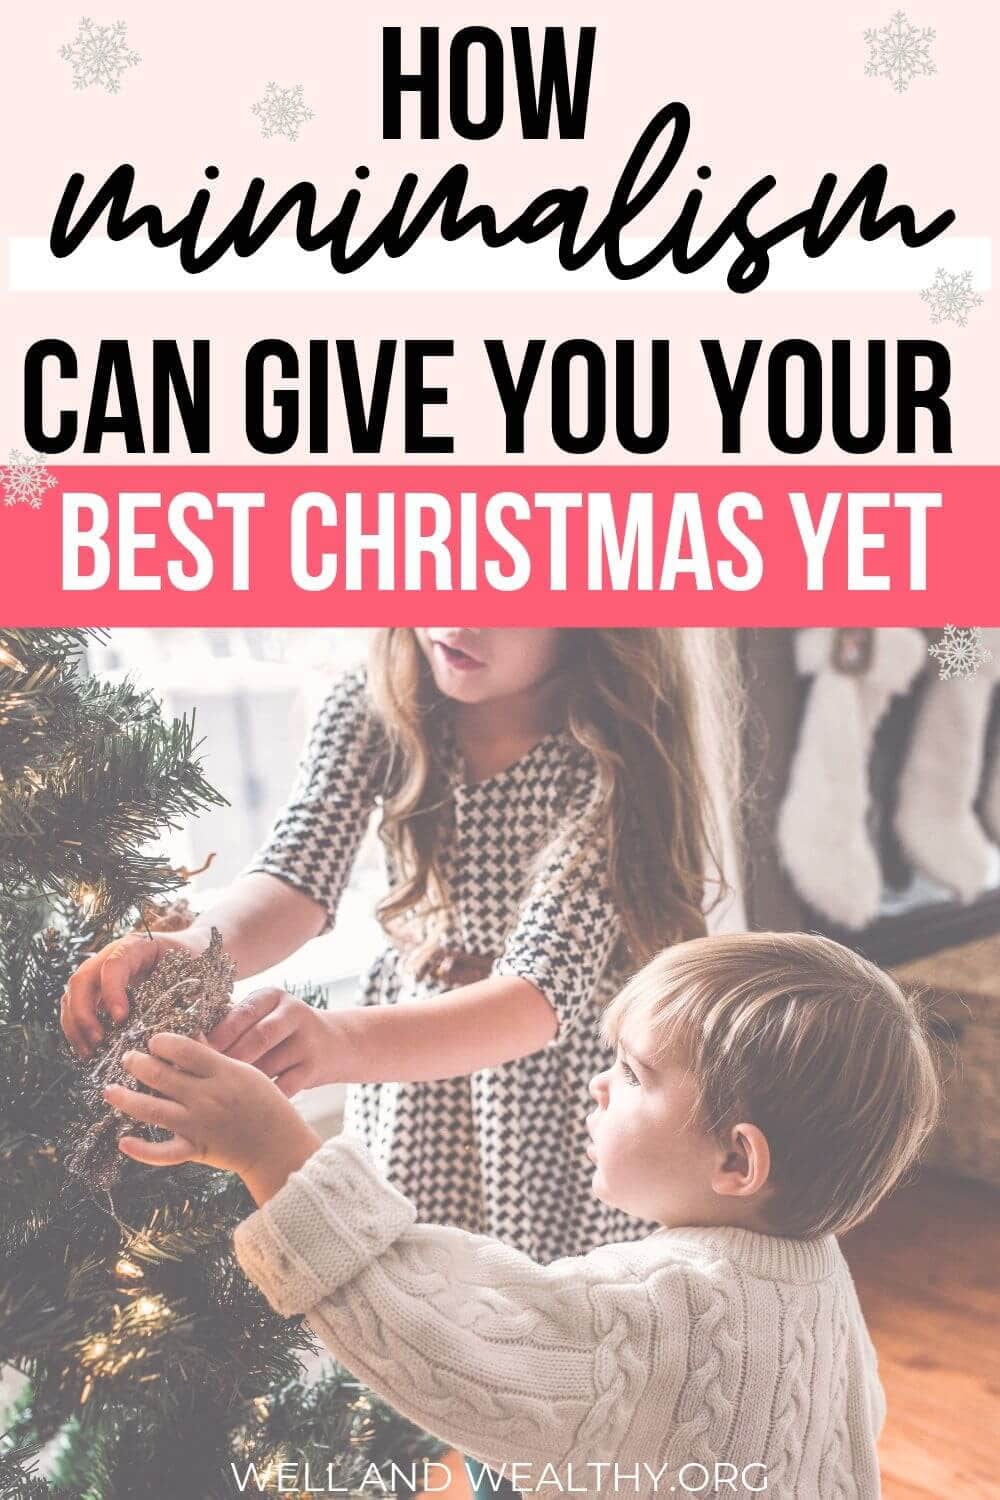 Make your Christmas stress-free this year with minimalism! Take your holidays from crazy overconsumption to calm and happy with the minimalist Christmas ideas in this post. From gifts, decorations, trees, aesthetic, decorating, presents, cards and so much more you will everything you need to create your most magical and best Christmas yet. #minimalistchristmas #minimalist #christmas